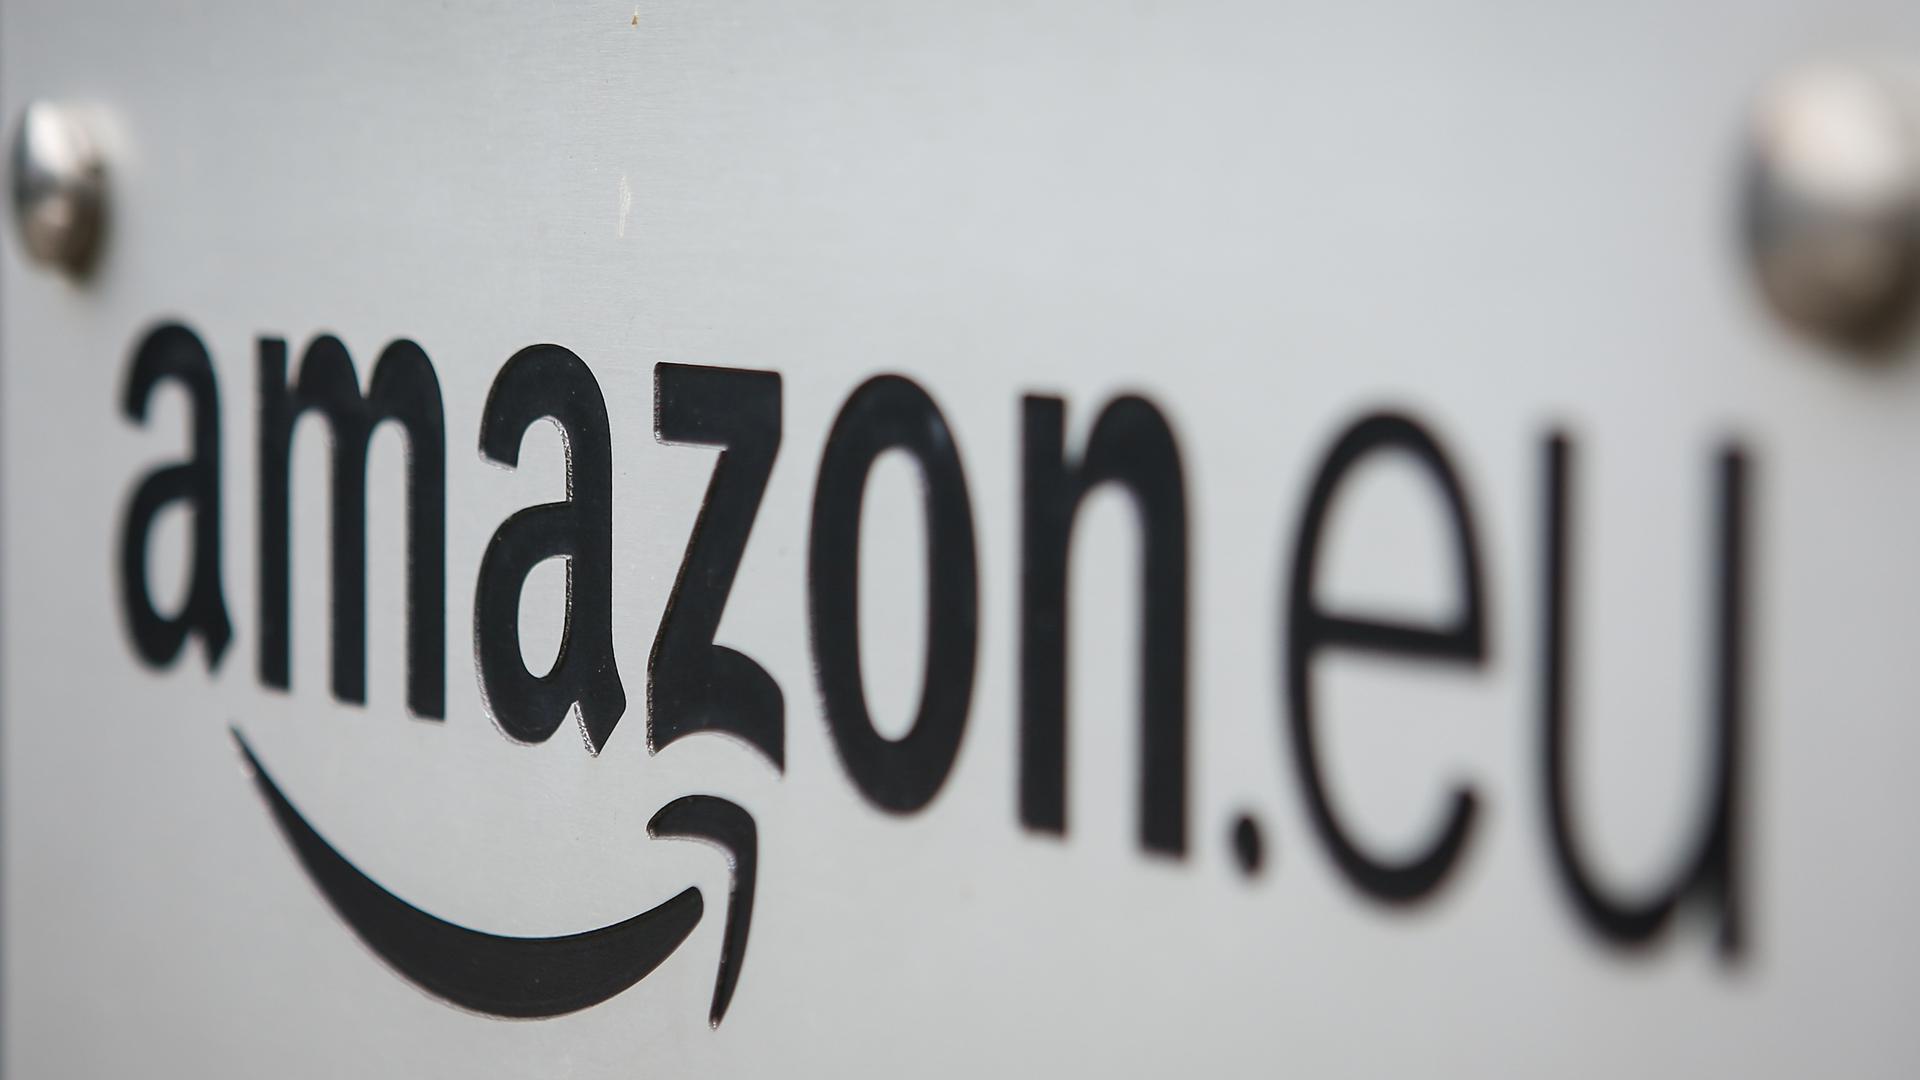 Getting agreement over how to deal with large online businesses such as Amazon remains a sticking point